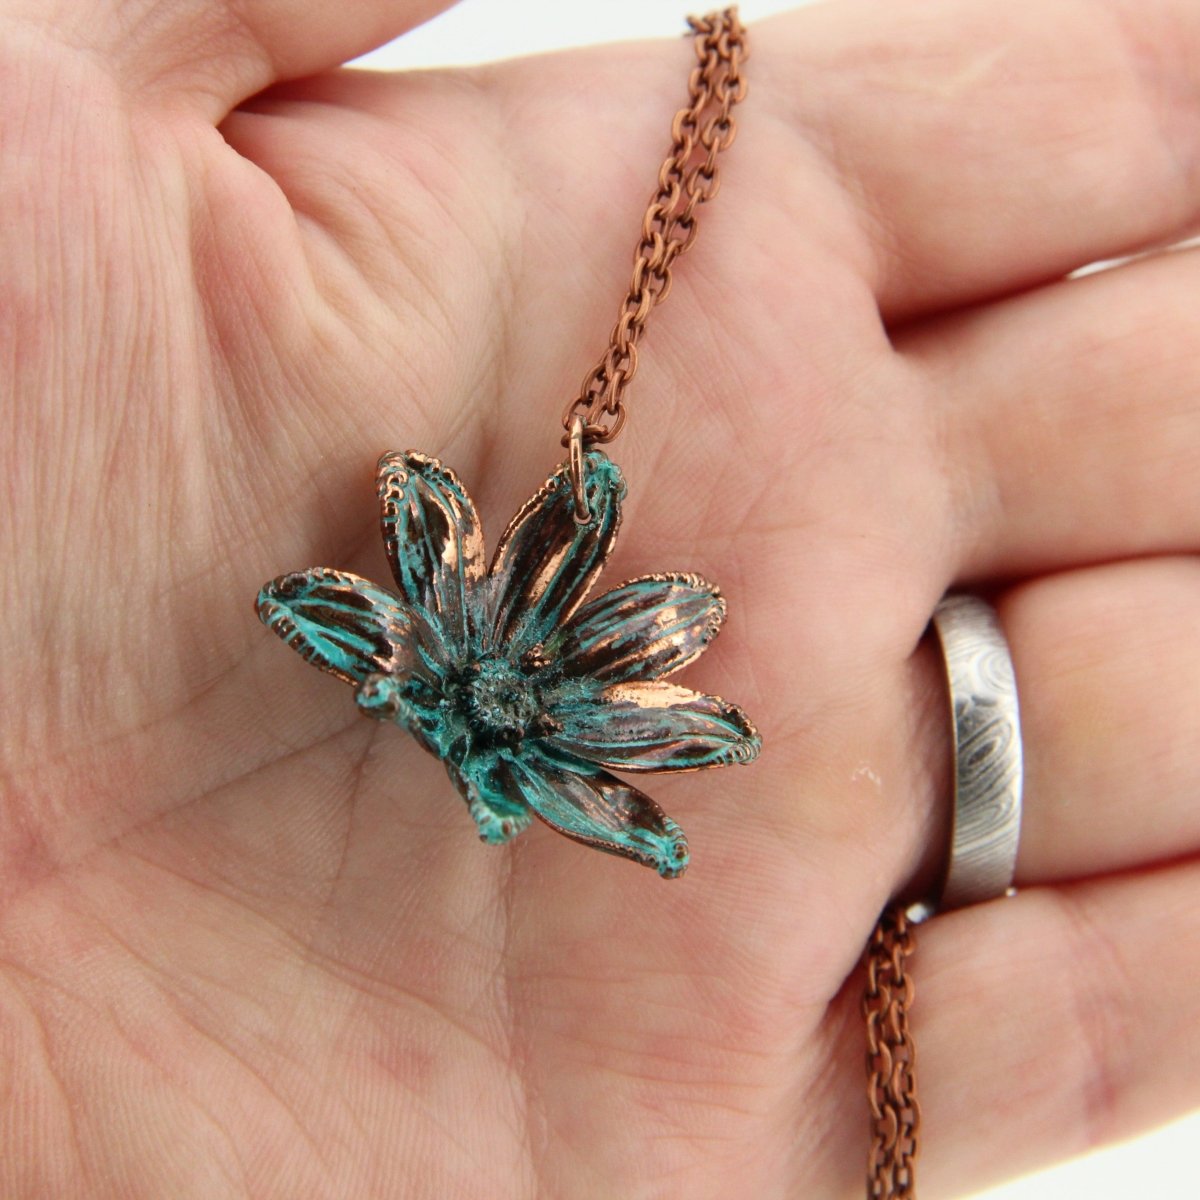 Copper Electroformed Plant Pendant - Real Coreopsis Flower